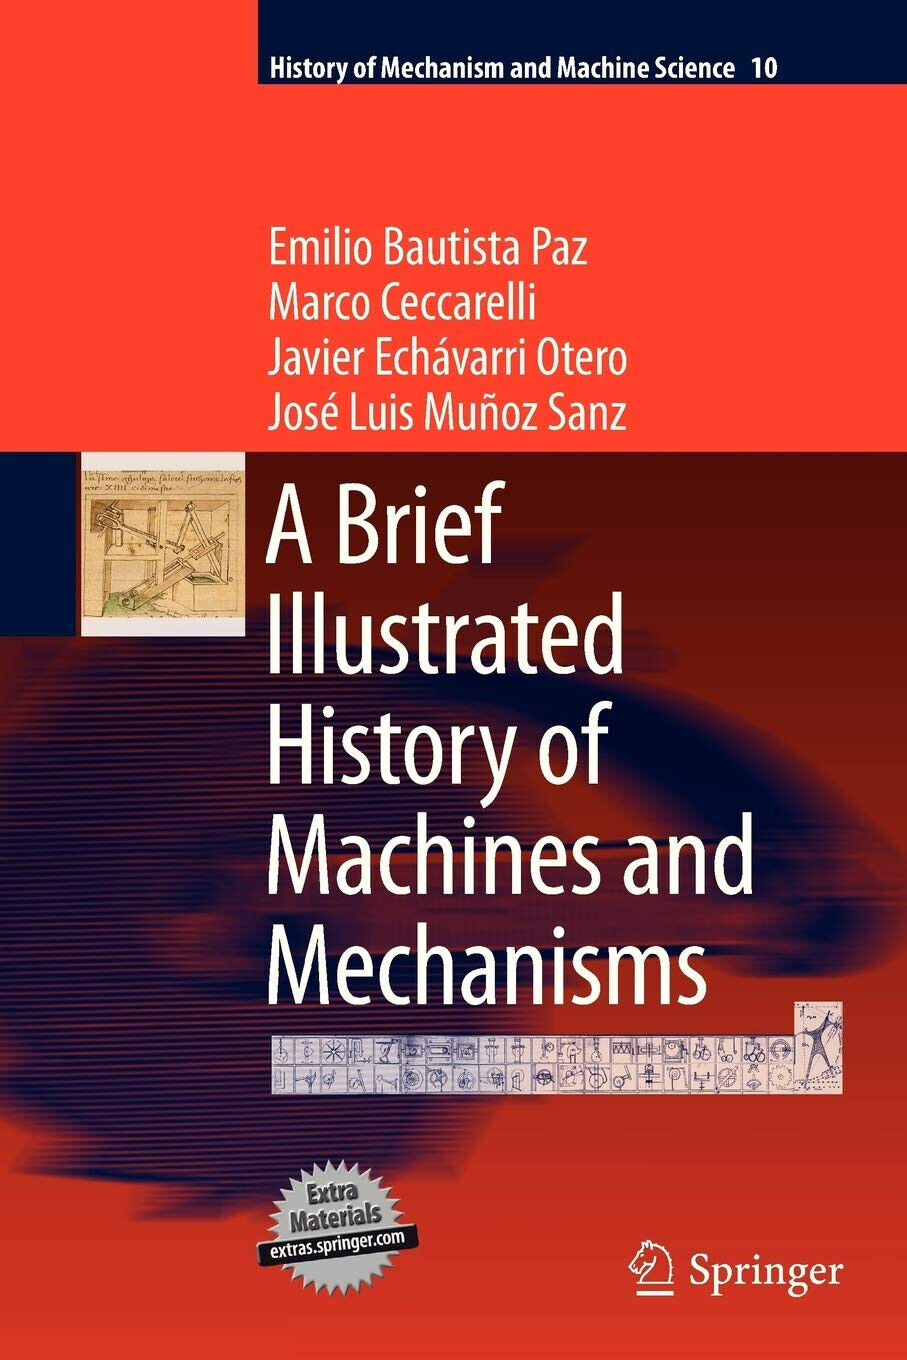 A Brief Illustrated History of Machines and Mechanisms - Emilio Bautista Paz libro usato